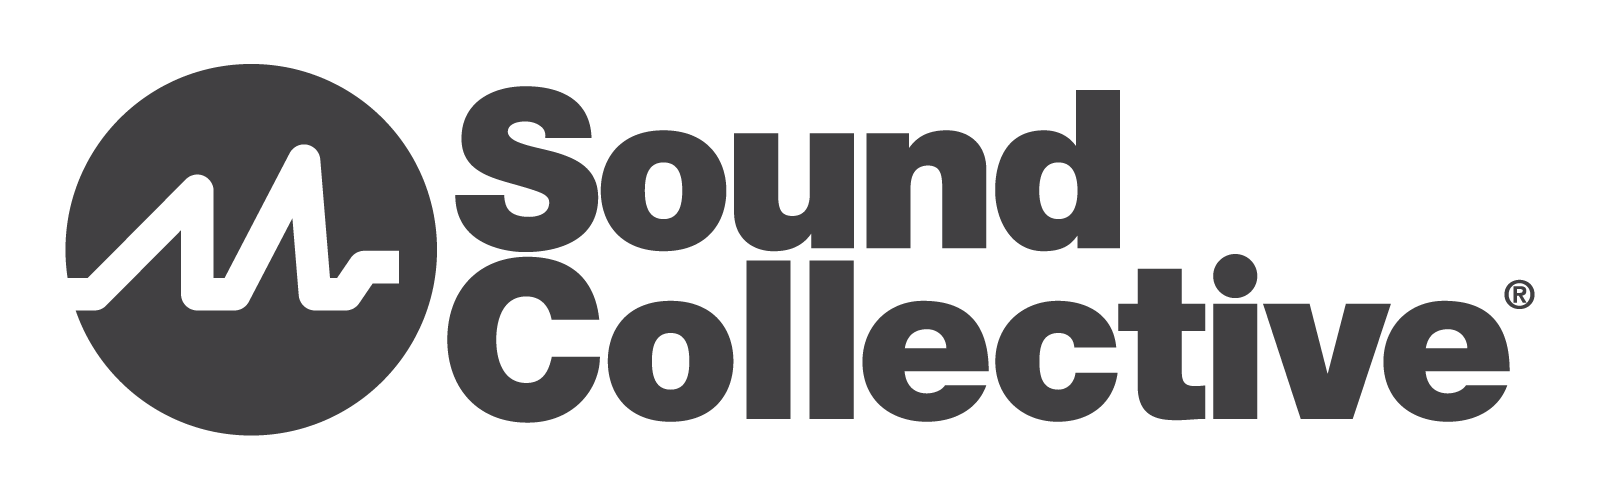 soundcollective,sound collective,drummers collective,electronic music collective,nyc, NYC Campus [OLD], SoundCollective